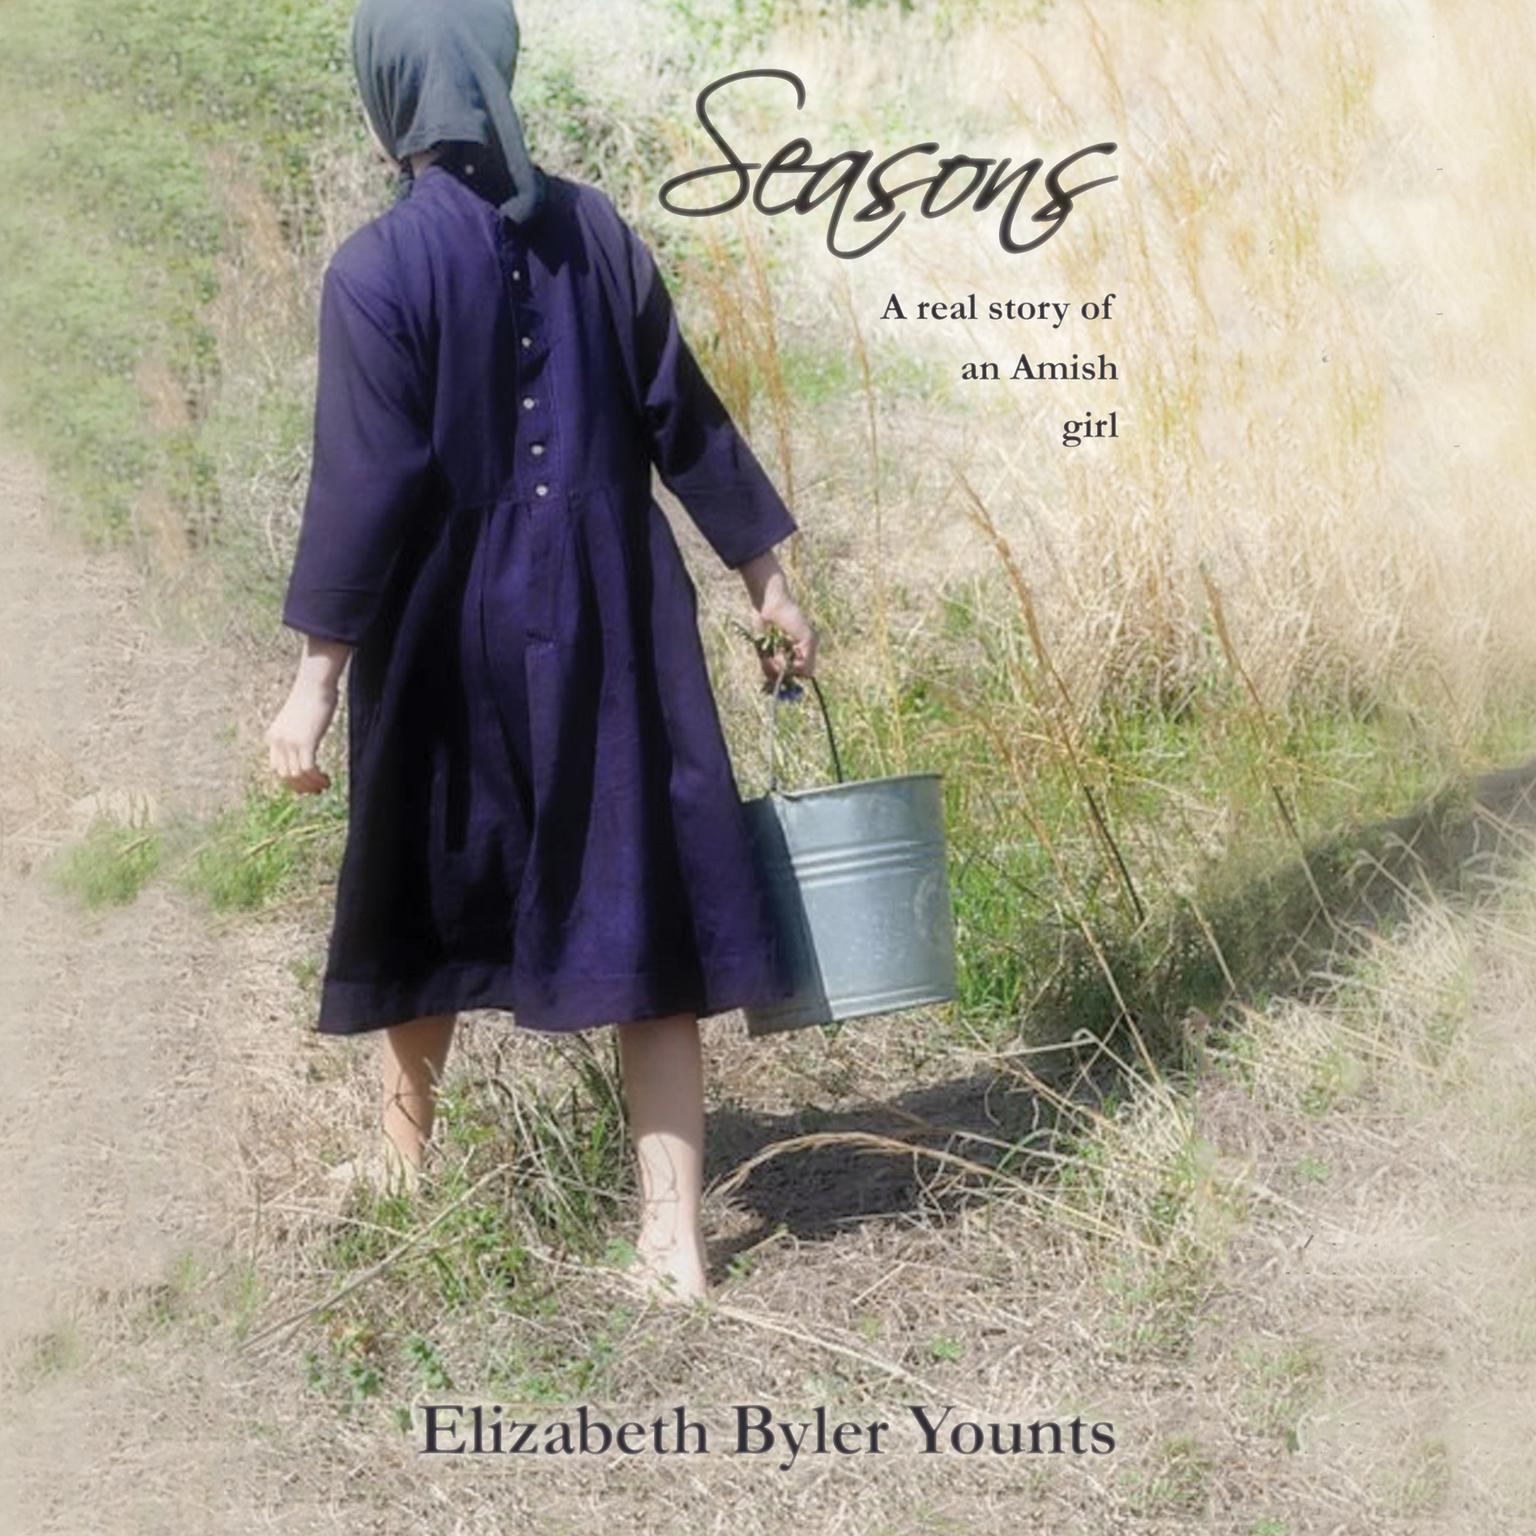 Seasons: A Real Story of an Amish Girl: A Real Story of an Amish Girl Audiobook, by Elizabeth Byler Younts